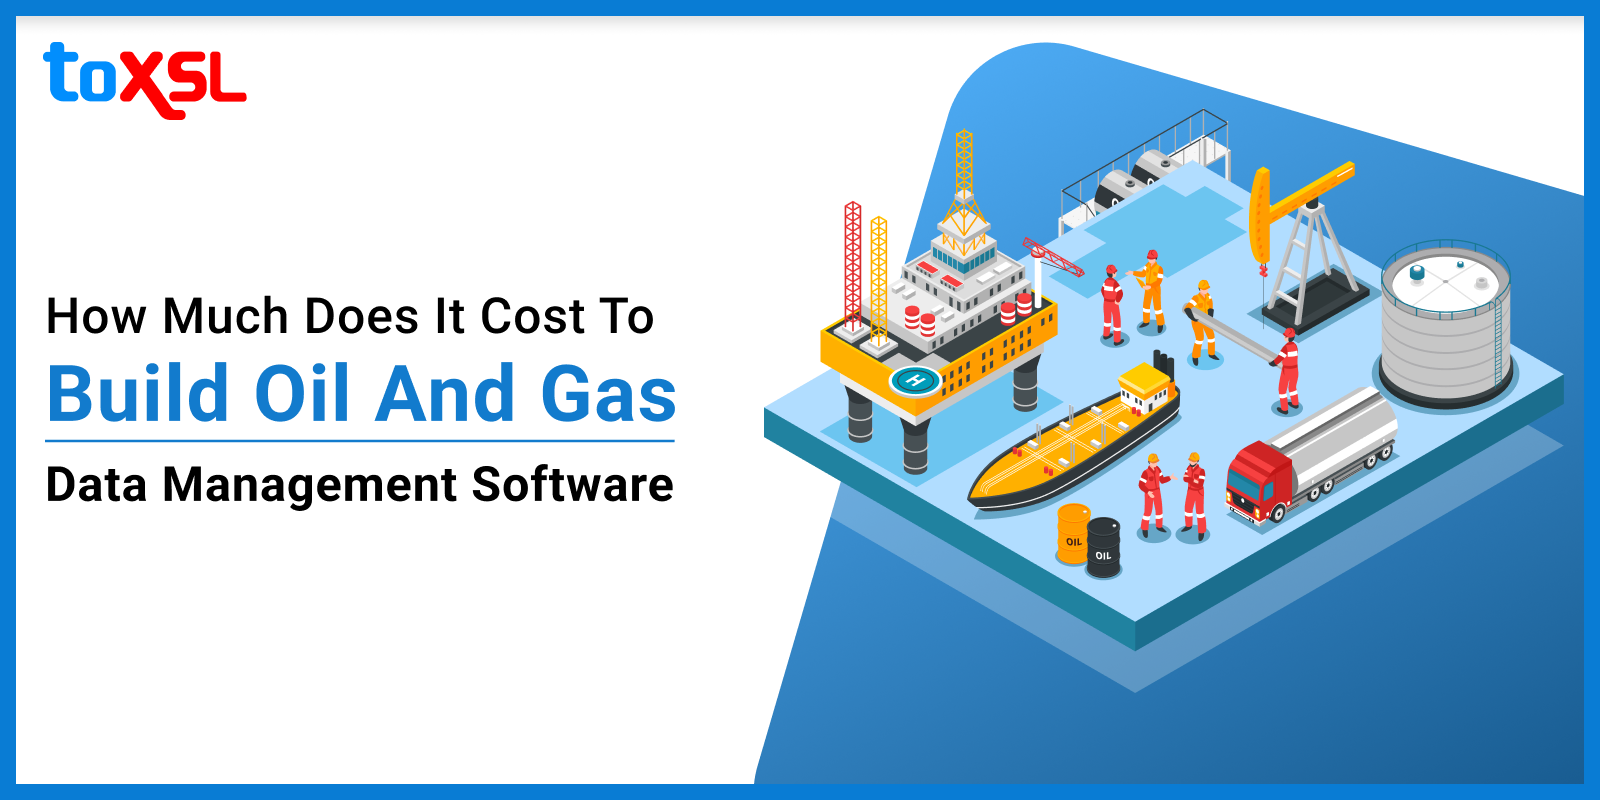 How Much Does it Cost to Build Oil and Gas Data Management Software?